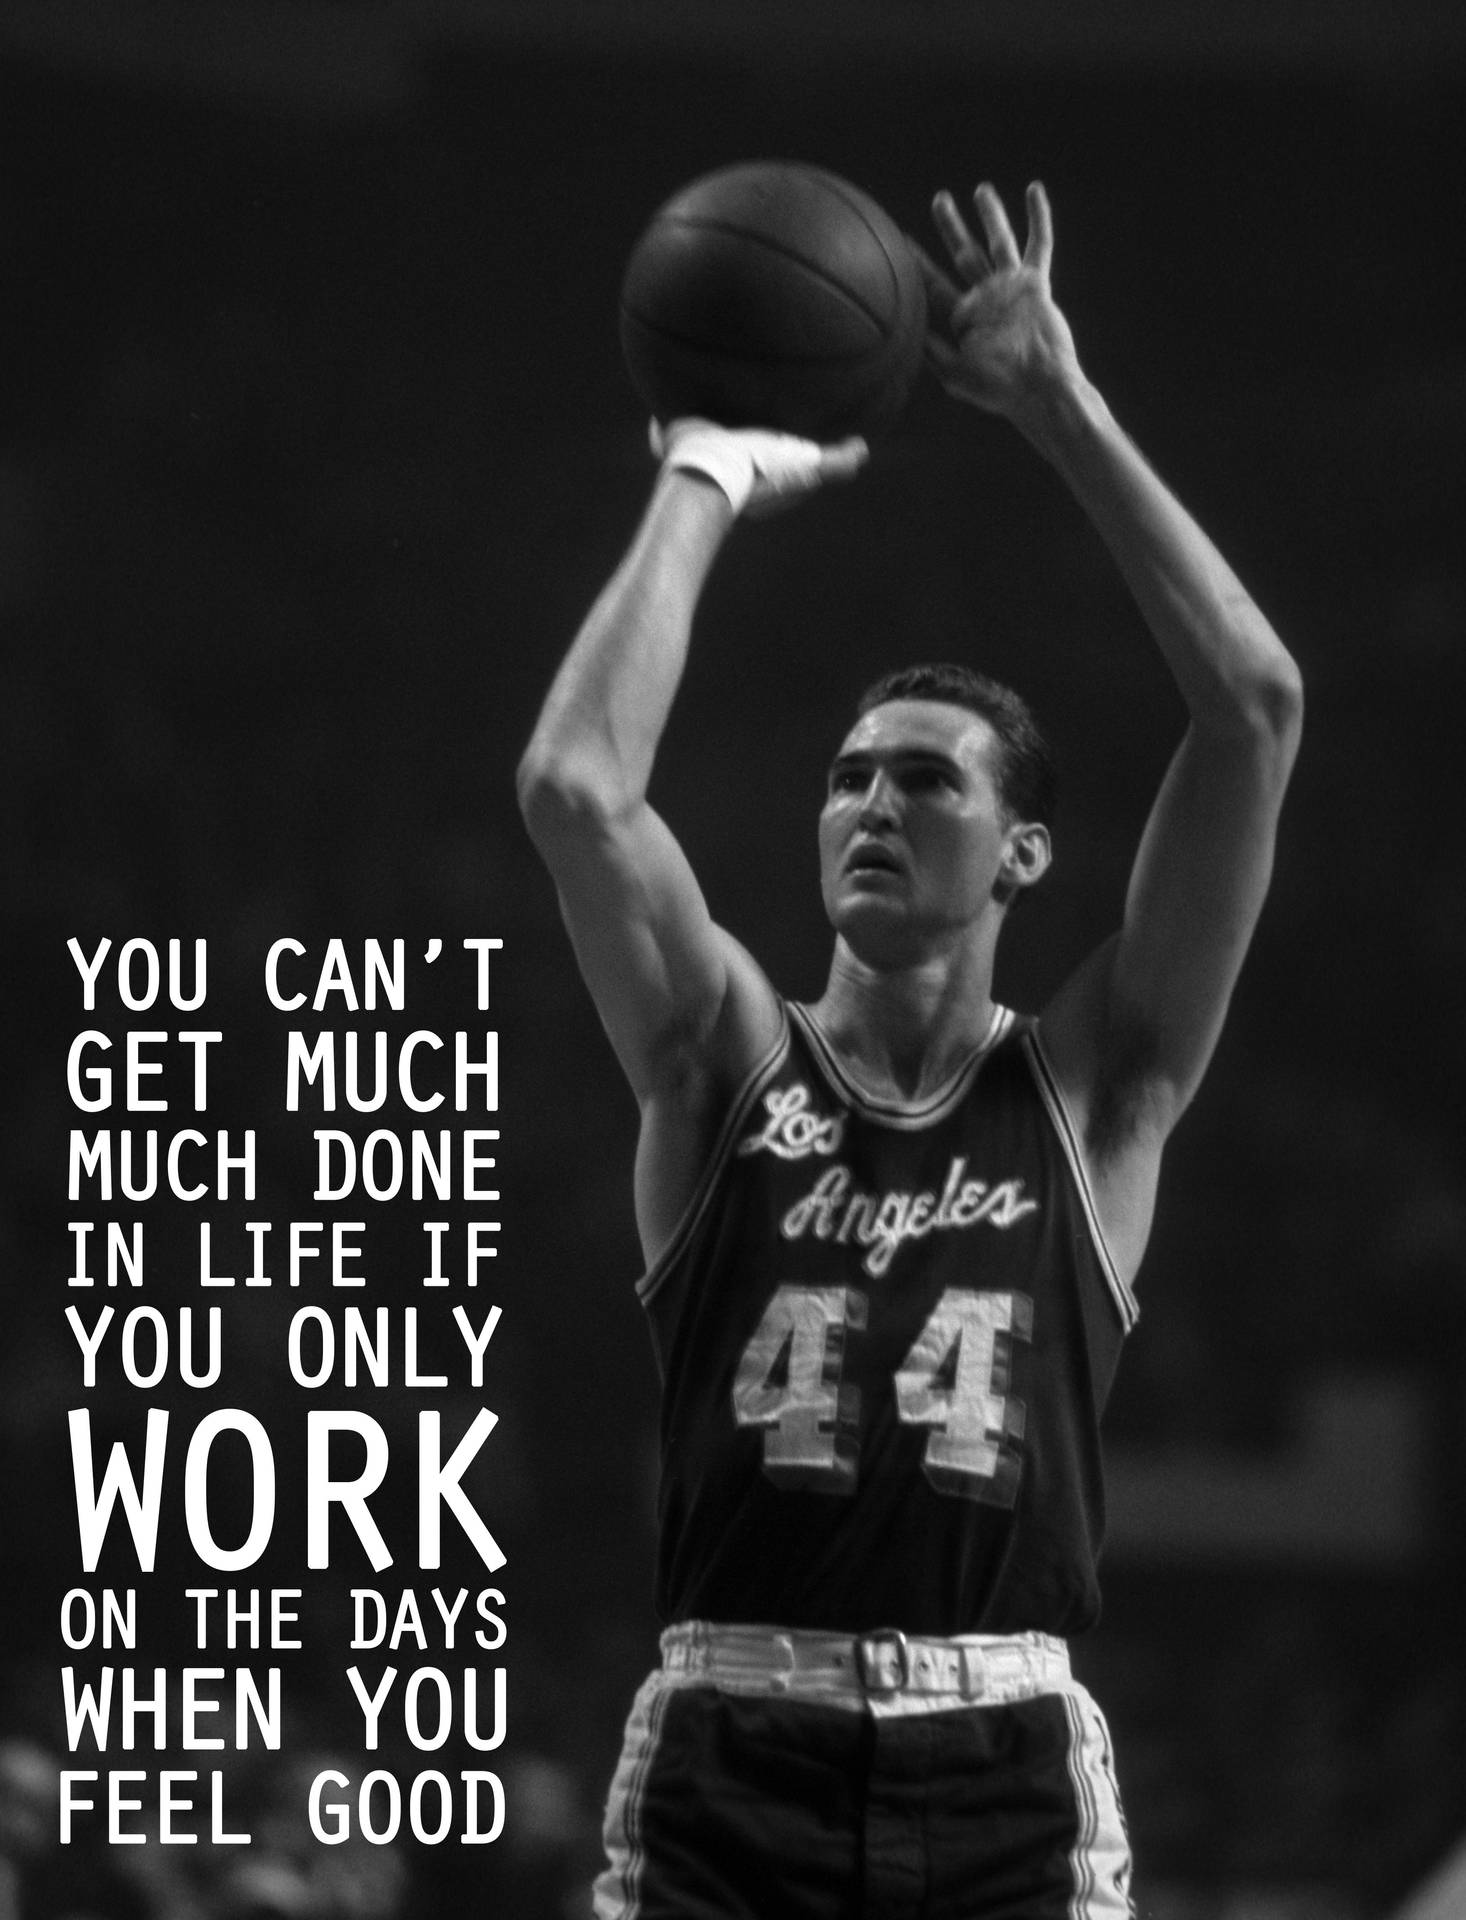 Jerry West Mr. Clutch Basketball Sports Quote Wallpaper: Jerry West Mr. Clutch Basketball Sports Quote Wallpaper Wallpaper